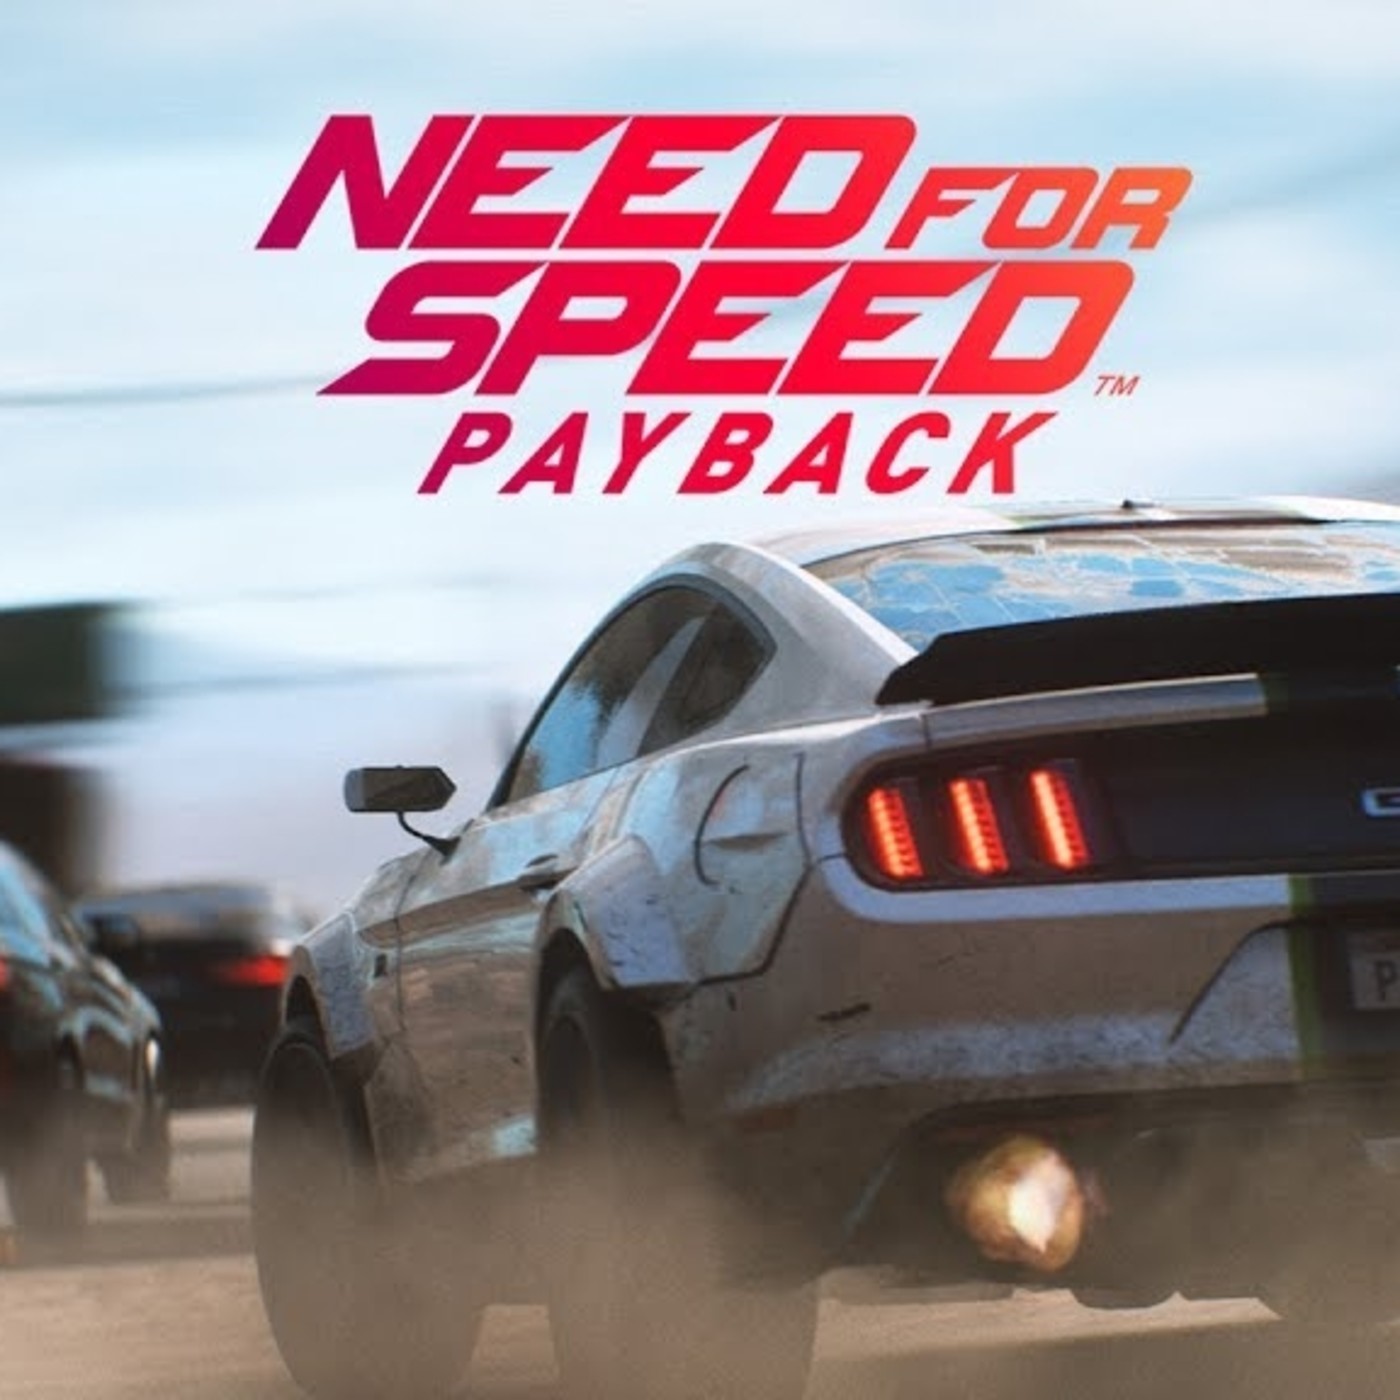 Need for speed playback. Need for Speed пейбек. Need for Speed Payback (ps4). Пэйбэк 3. NFS Payback ps5.